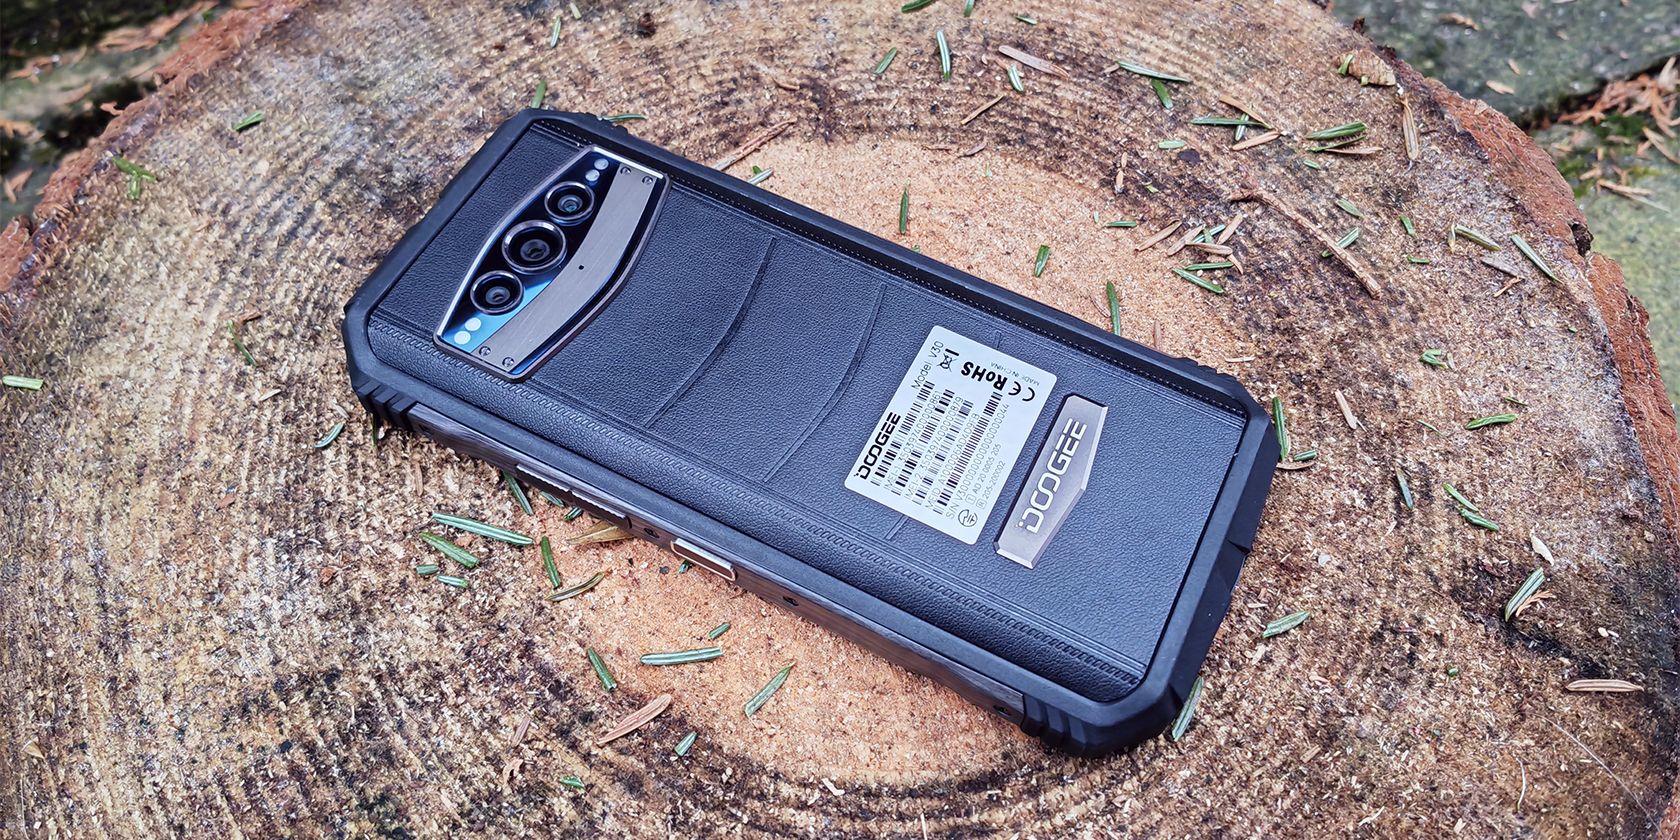 Doogee - Introducing the world's most powerful rugged smartphone, the Doogee  V30. A sophisticated, rugged smartphone design with impressive camera  upgrades and groundbreaking features and capabilities. In your opinion,  what makes the